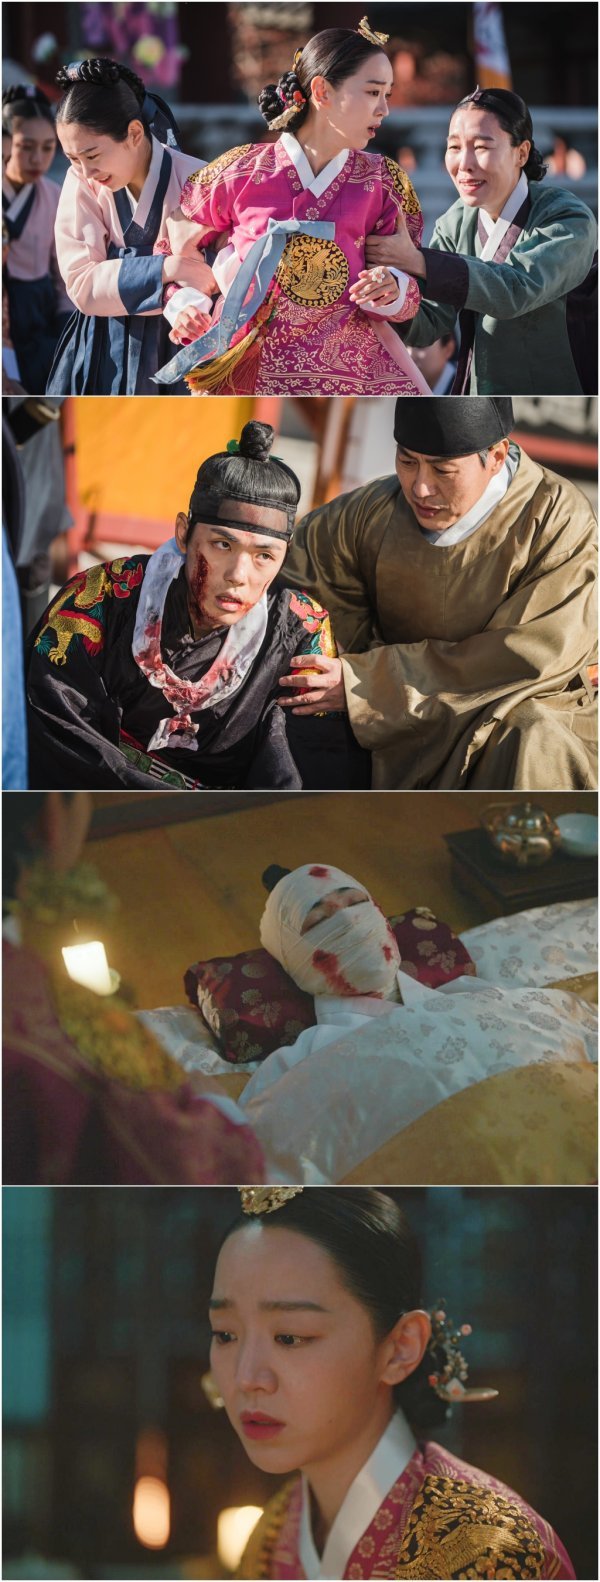 Dong-A.com] The accident that hit Kim Jung-hyun brings a strong aftermath.In the last broadcast, Cheoljong was hit by a desperate Danger.Cheoljong thoroughly prepared the Suri Day banquet to strengthen his royal authority, but was in trouble due to the interruption of forces trying to break his momentum.Kim So-yong, who sensed this, was able to get away with Danger by taking out the cooking machine.However, Cheoljong was frustrated by the attack of Kim Jae-geun (Kim Tae-woo), who had caught weaknesses, realizing the reality of the scarecrow king again.The explosion of the question aimed at Cheoljong further heightened the sense of Danger.In the meantime, the dangerous appearance of Cheoljong in the public photos raises tension.Kim So-yongs grieving struggle to reach Cheoljong adds to the distraction of Choi Sang-gung (Cha Cheong-hwa) and Hong Yeon (Cha Seo-eun).Kim So-yongs sad eyes looking at the Tainted Love Song Cheoljong in the ensuing photos are filled with complex emotions.In particular, in the previous trailer, Kim So-yongs sad appearance was revealed to Cheoljong, So do not die, do not die, do not get up and get up and get up to me.Therefore, it gives a sense of the relationship between the two people who have changed since the accident and focuses attention.In the 13th episode, which is broadcast on the 23rd, the palace is overturned due to the questionable accident that hit Cheoljong.Kim So-yong is also in Danger in the movement of the forces that start to make a new edition as well as the criminal of the case.The moment of choice comes to Kim So-yong.His decision to survive the palace surrounded by enemies will bring the blue to the palace with the heart of Cheoljong. The 13th episode of Queen Cheorin will be broadcast at 9 p.m. on the 23rd.